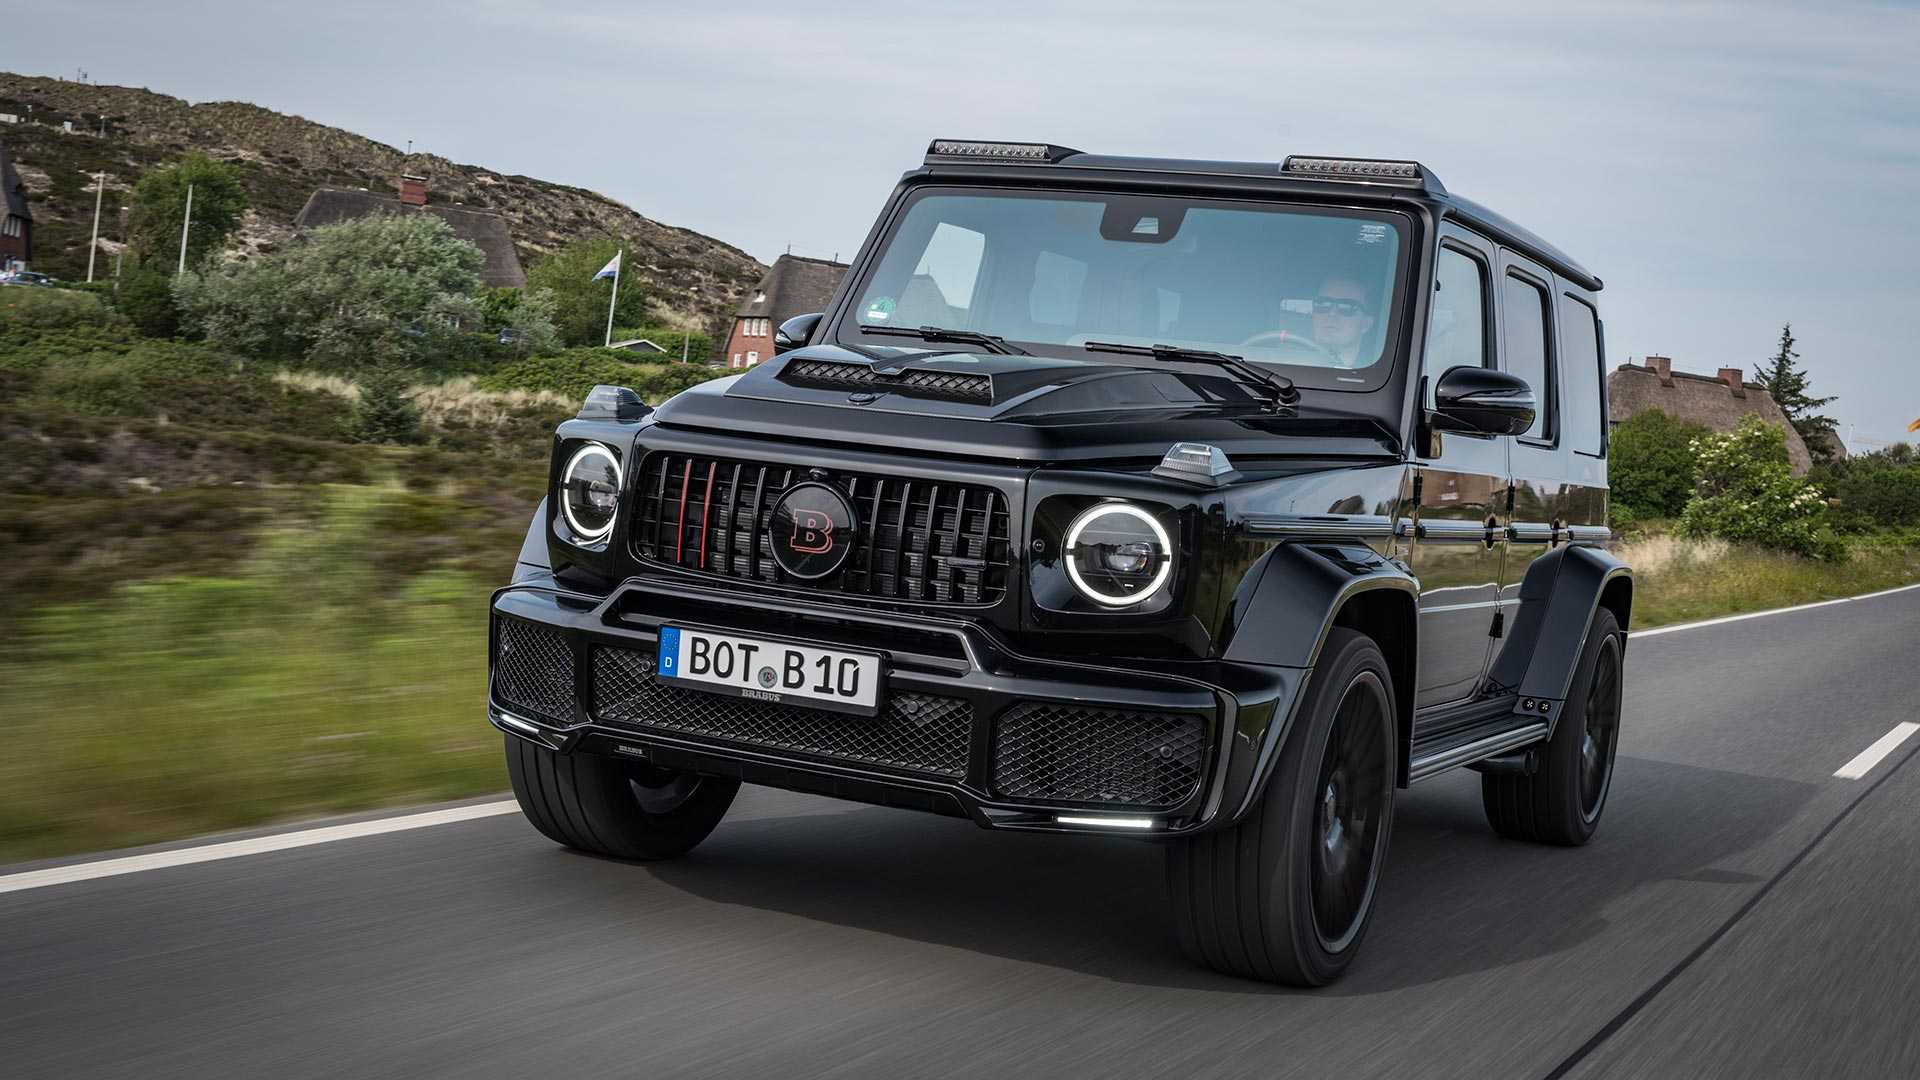 Brabus Double Trouble: Sinister 789 HP AMG G63s Revealed